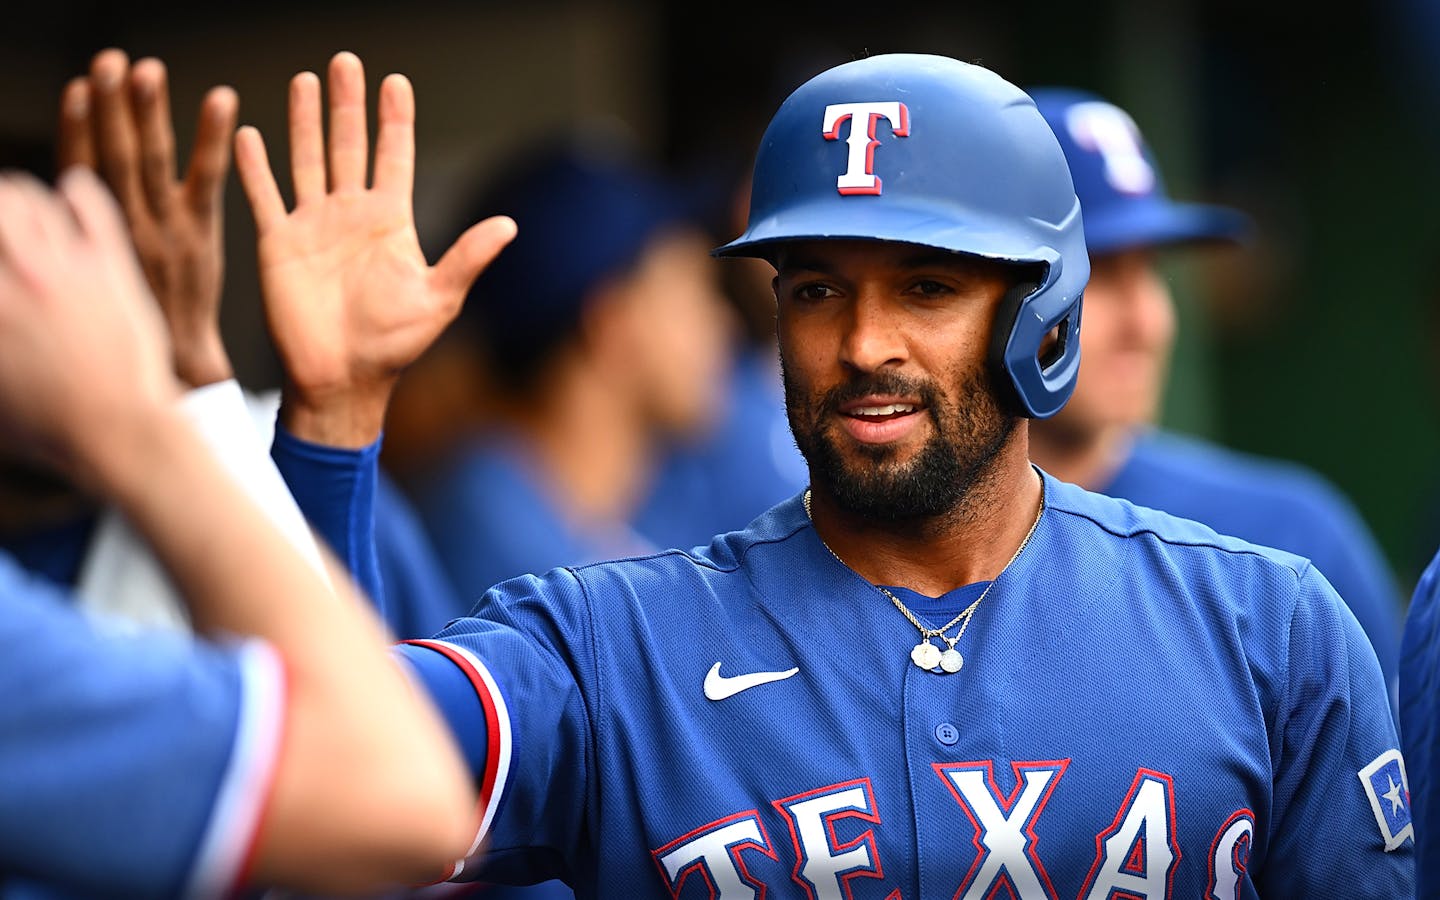 Main event: Why Texas Rangers are running away with the division